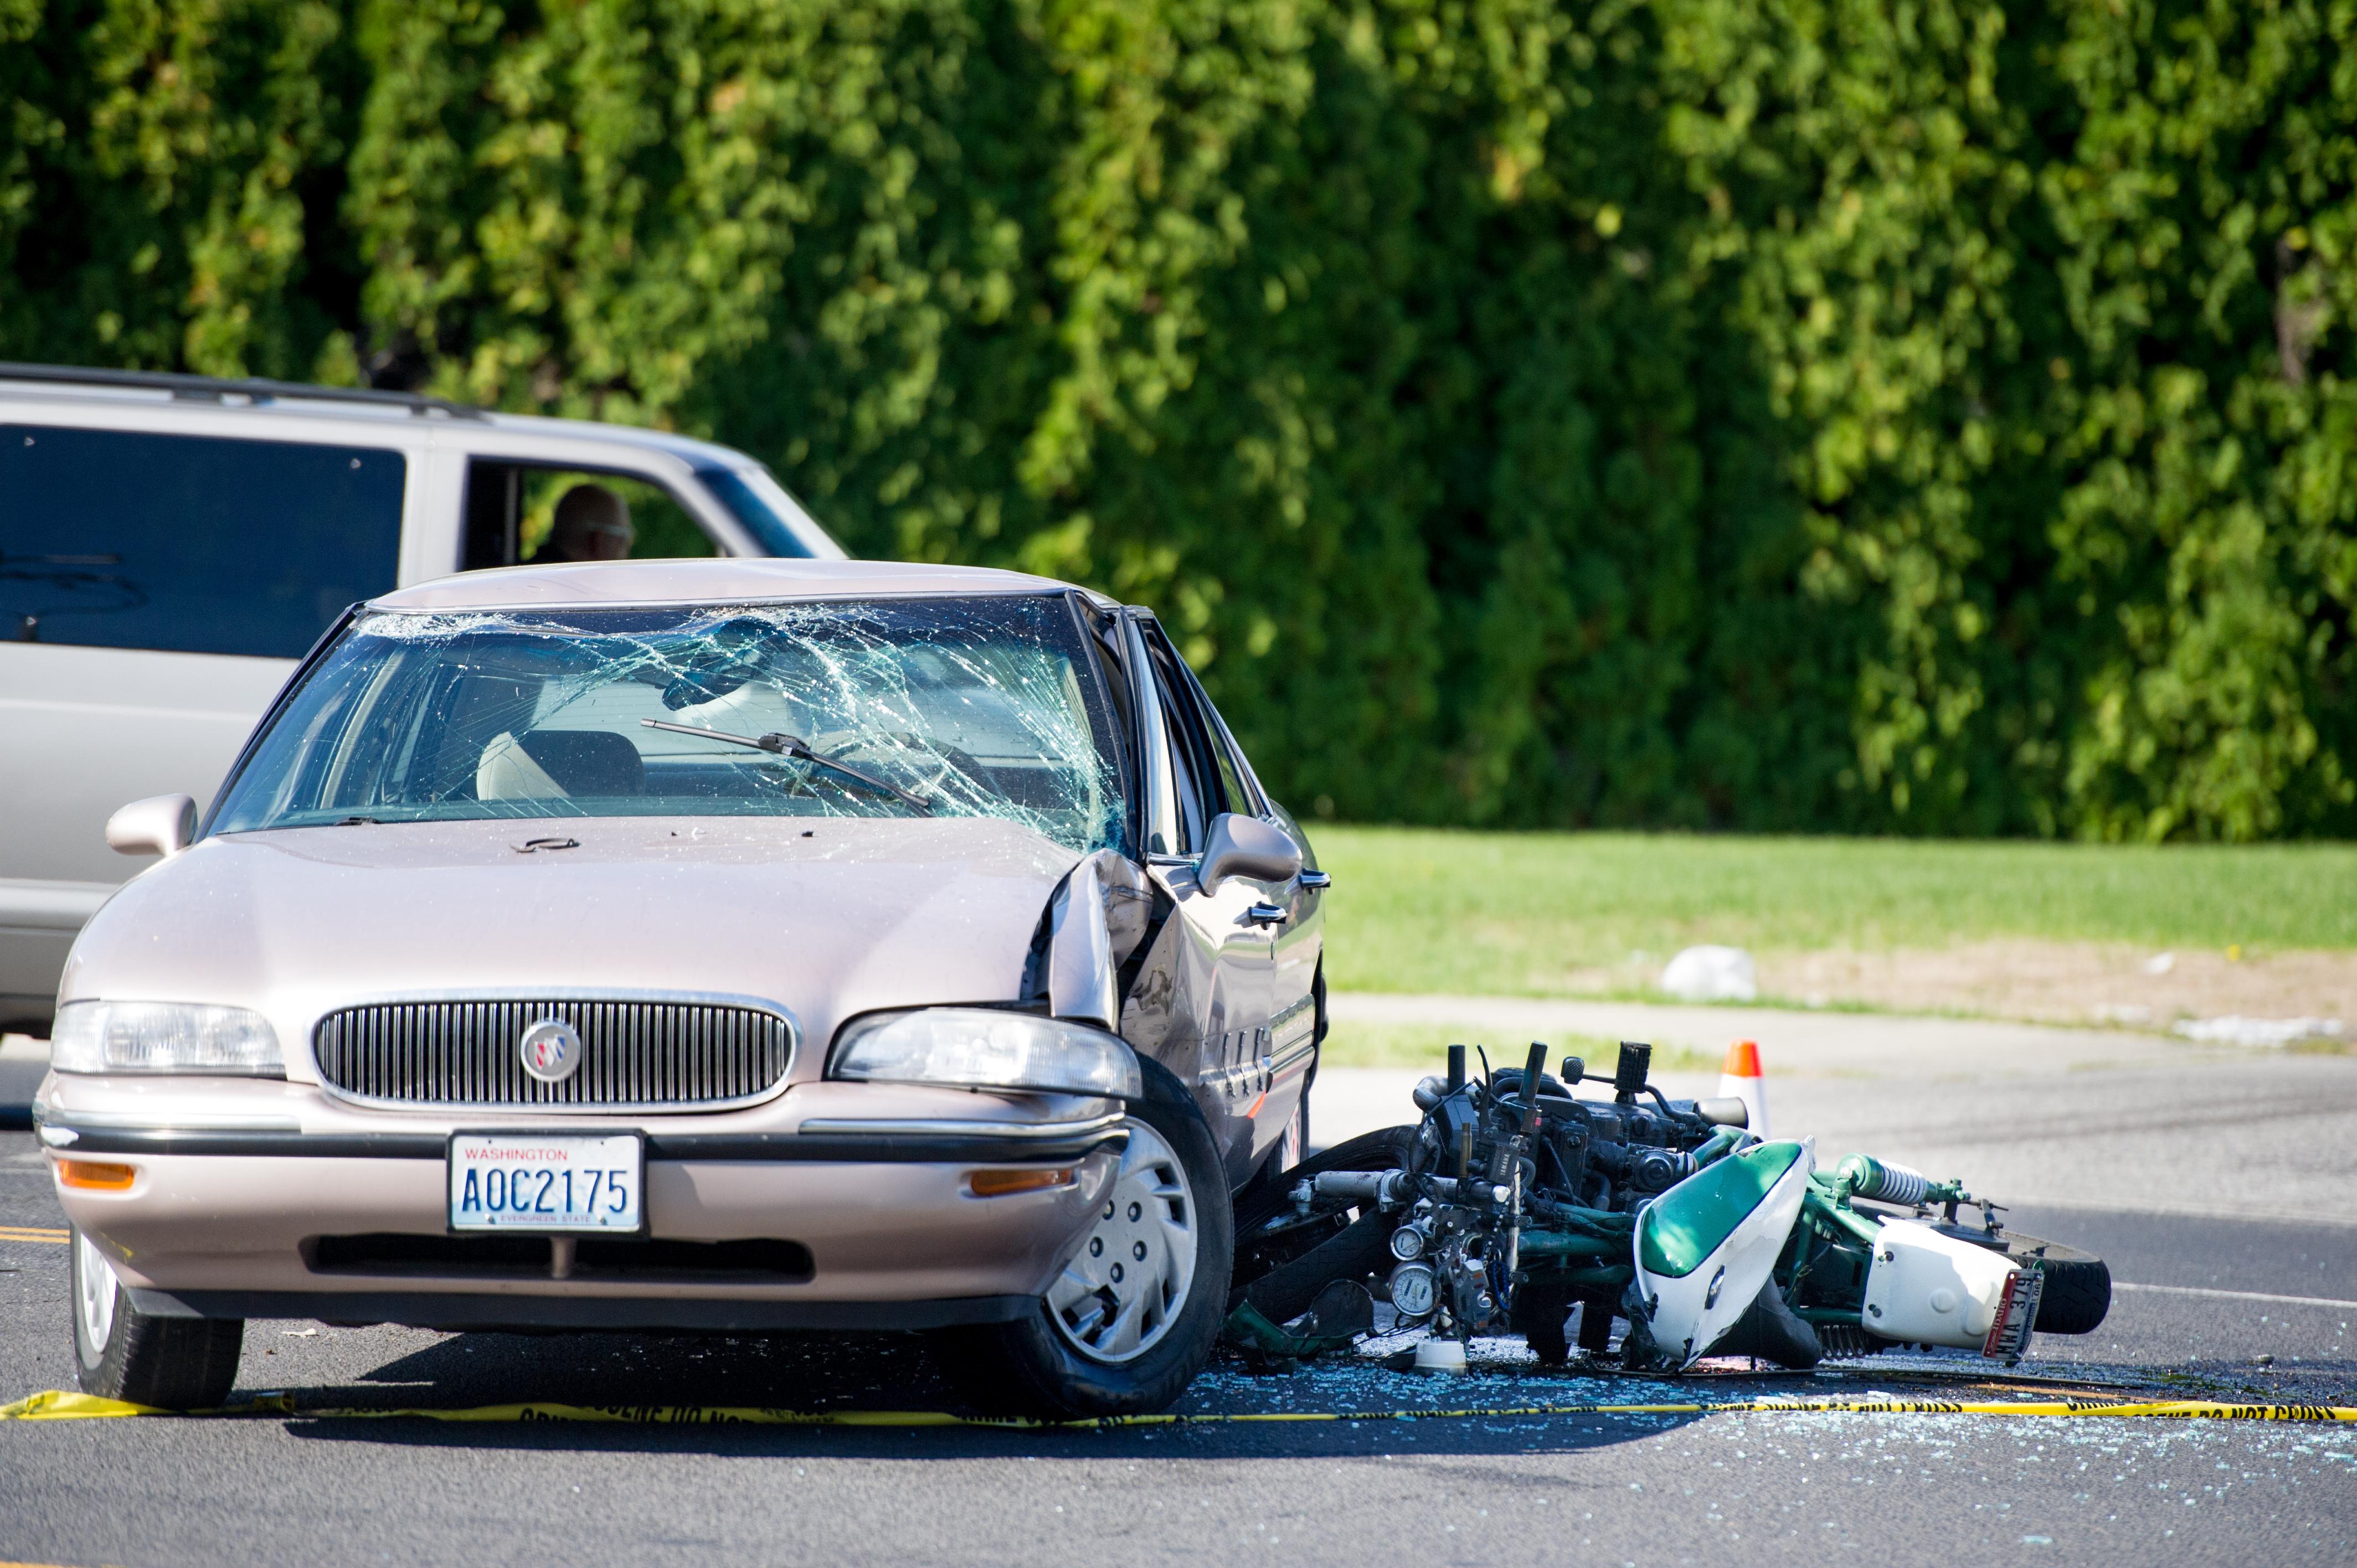 Motorcyclist dies in collision with car in north Spokane | The Spokesman-Review